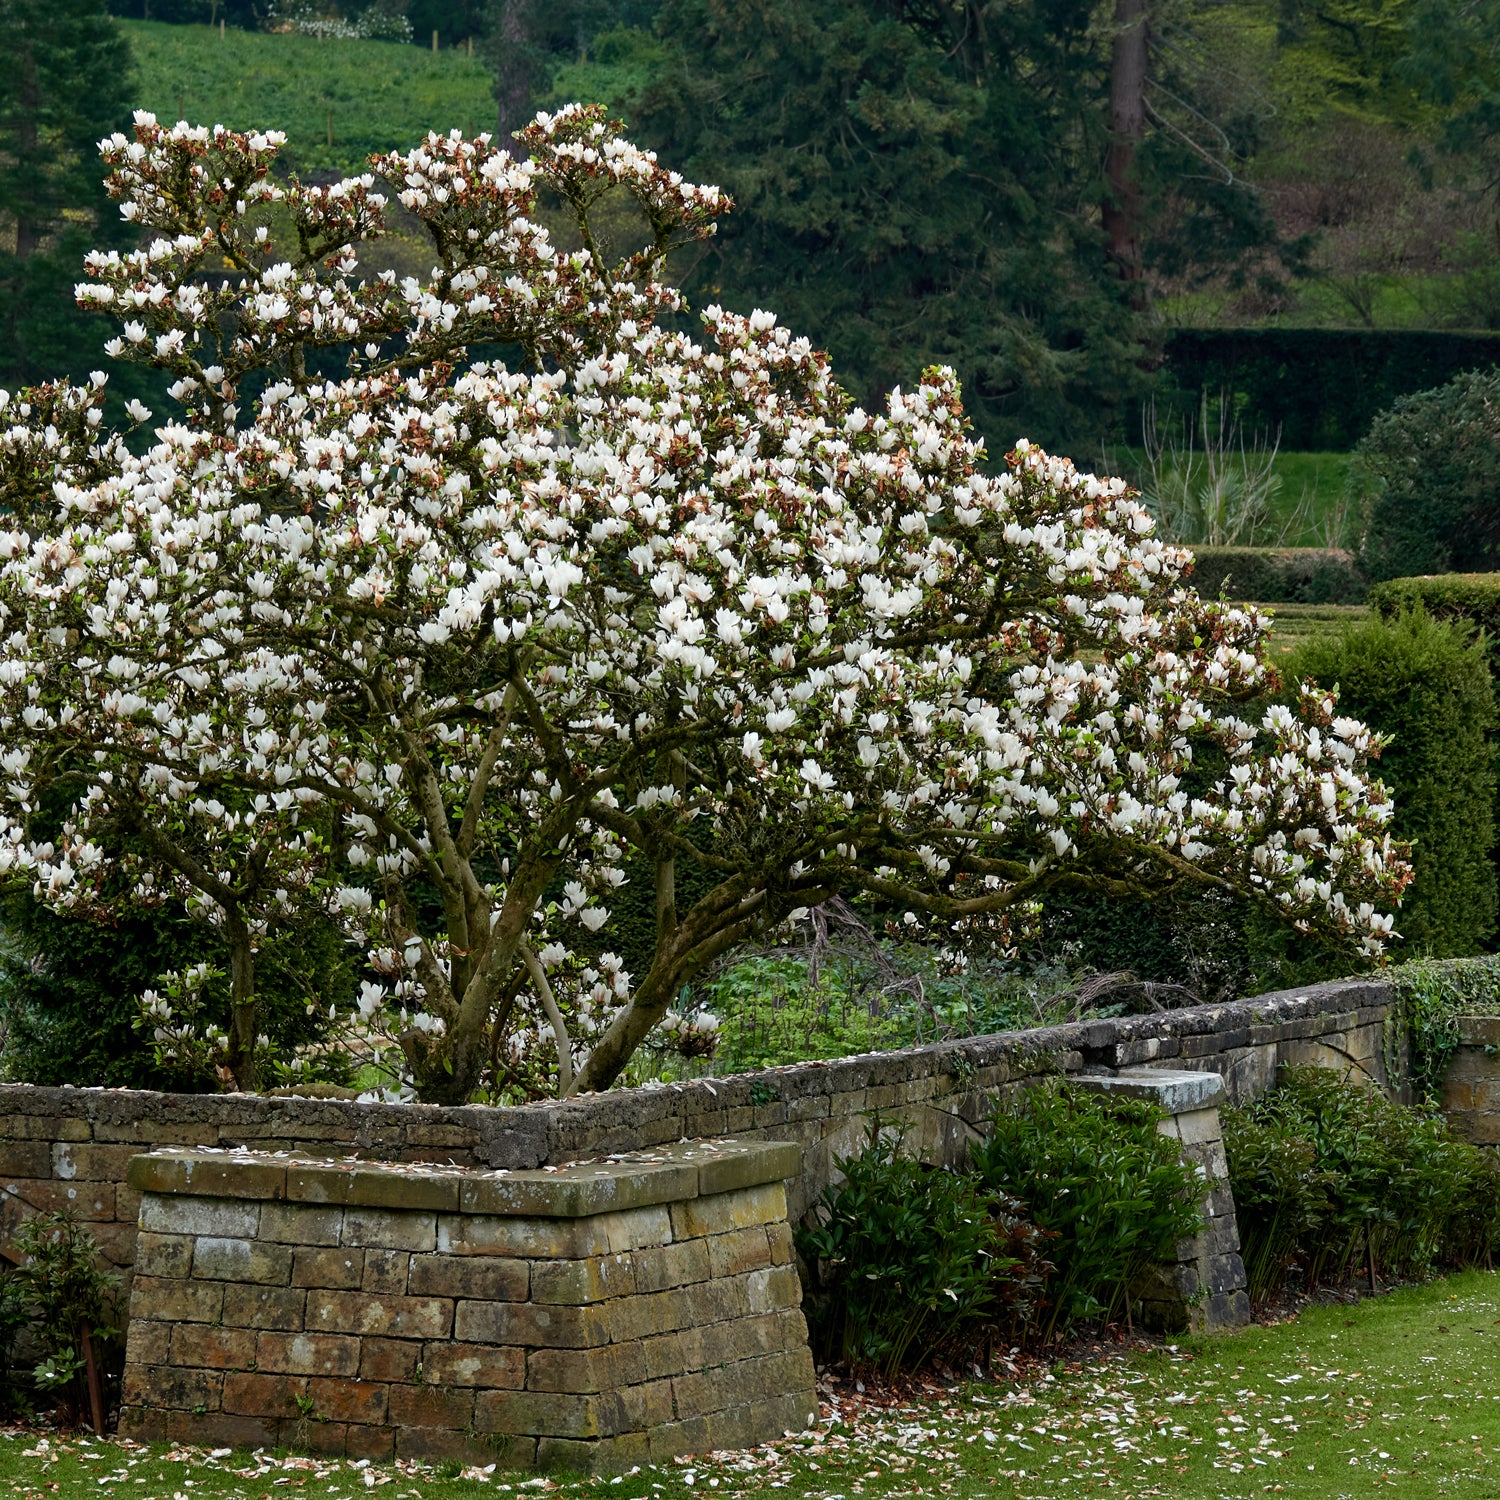 Lush magnolia plants in full bloom, showcasing the natural beauty that inspires our 'Magnolia' scented candle